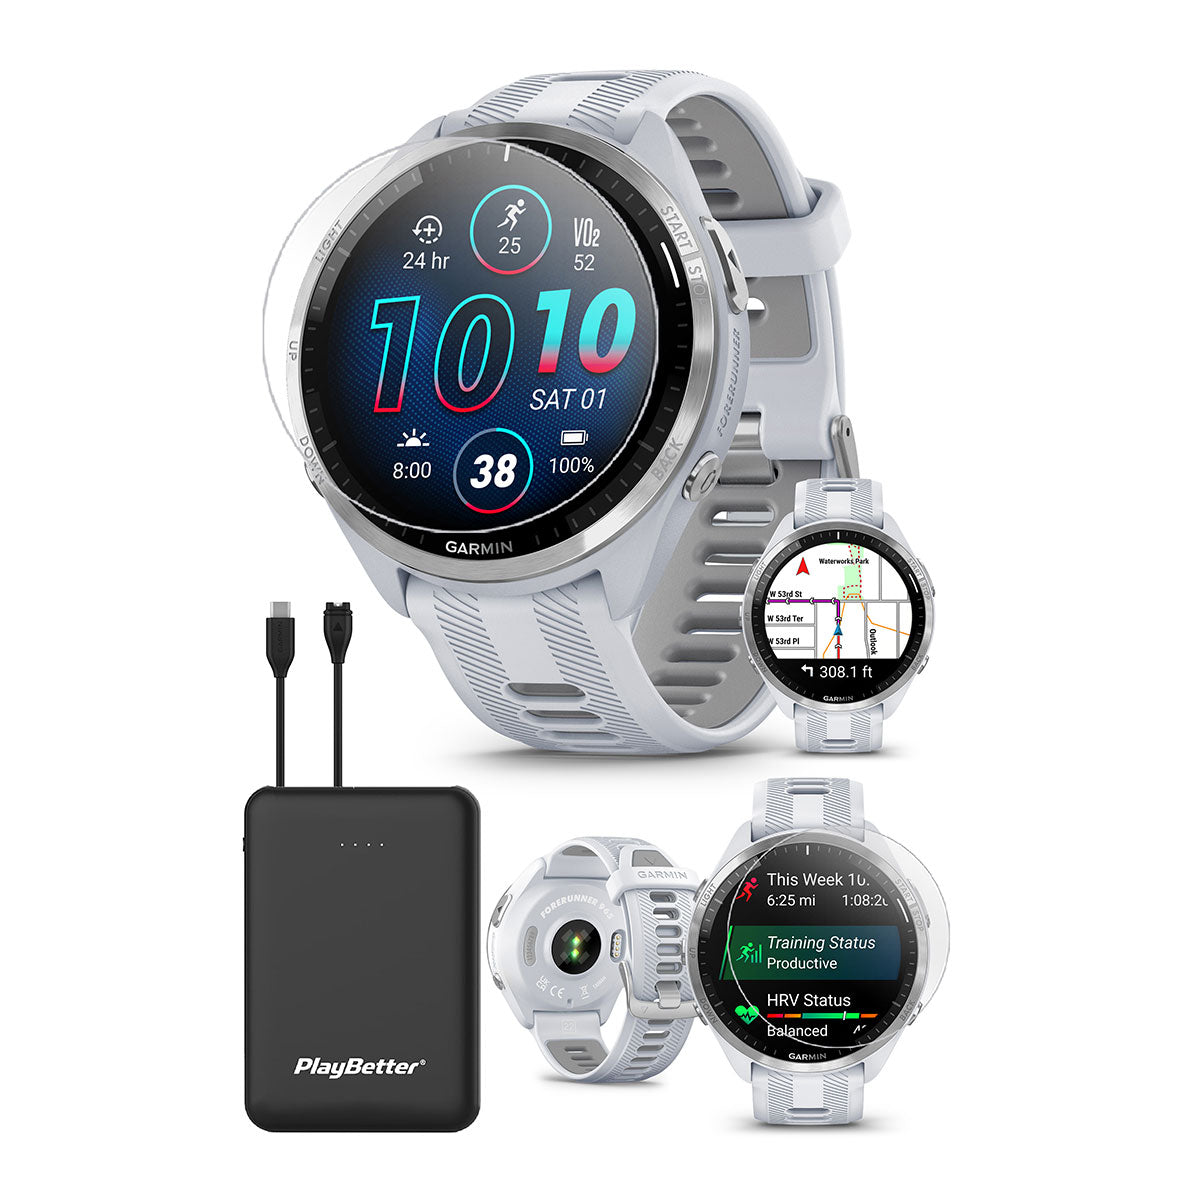 Garmin Forerunner 965 (Whitestone/Gray) Premium Running & Triathlon GPS Smartwatch | Bundle with PlayBetter Screen Protectors & Portable Charger - image 1 of 6